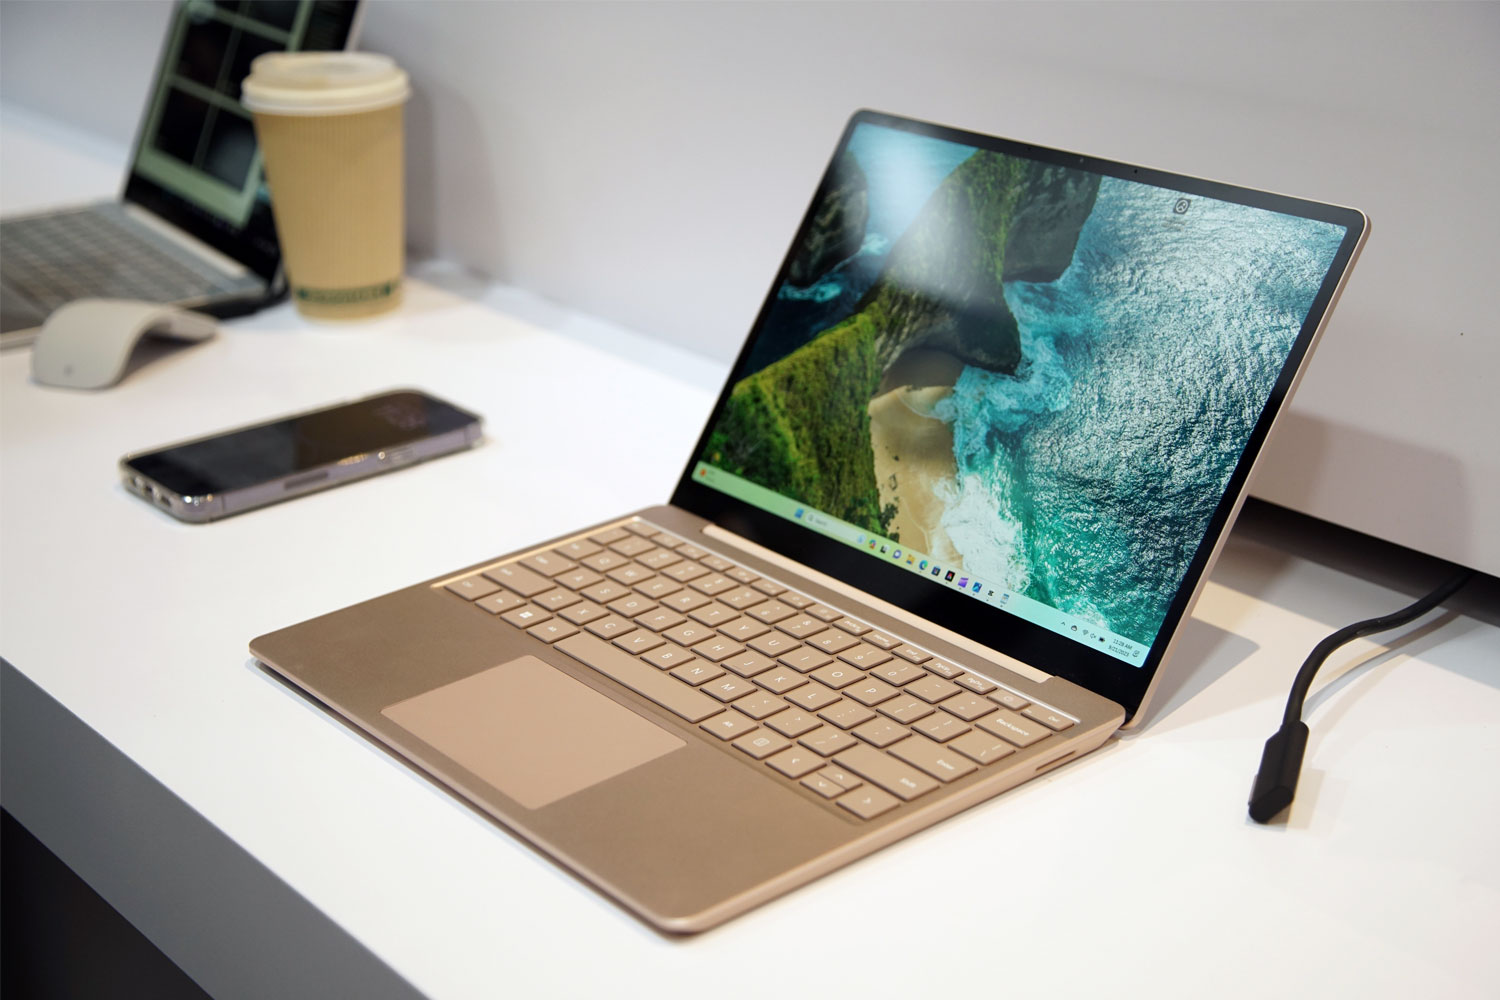 Microsoft's Surface Laptop Go 3 is one capable budget laptop